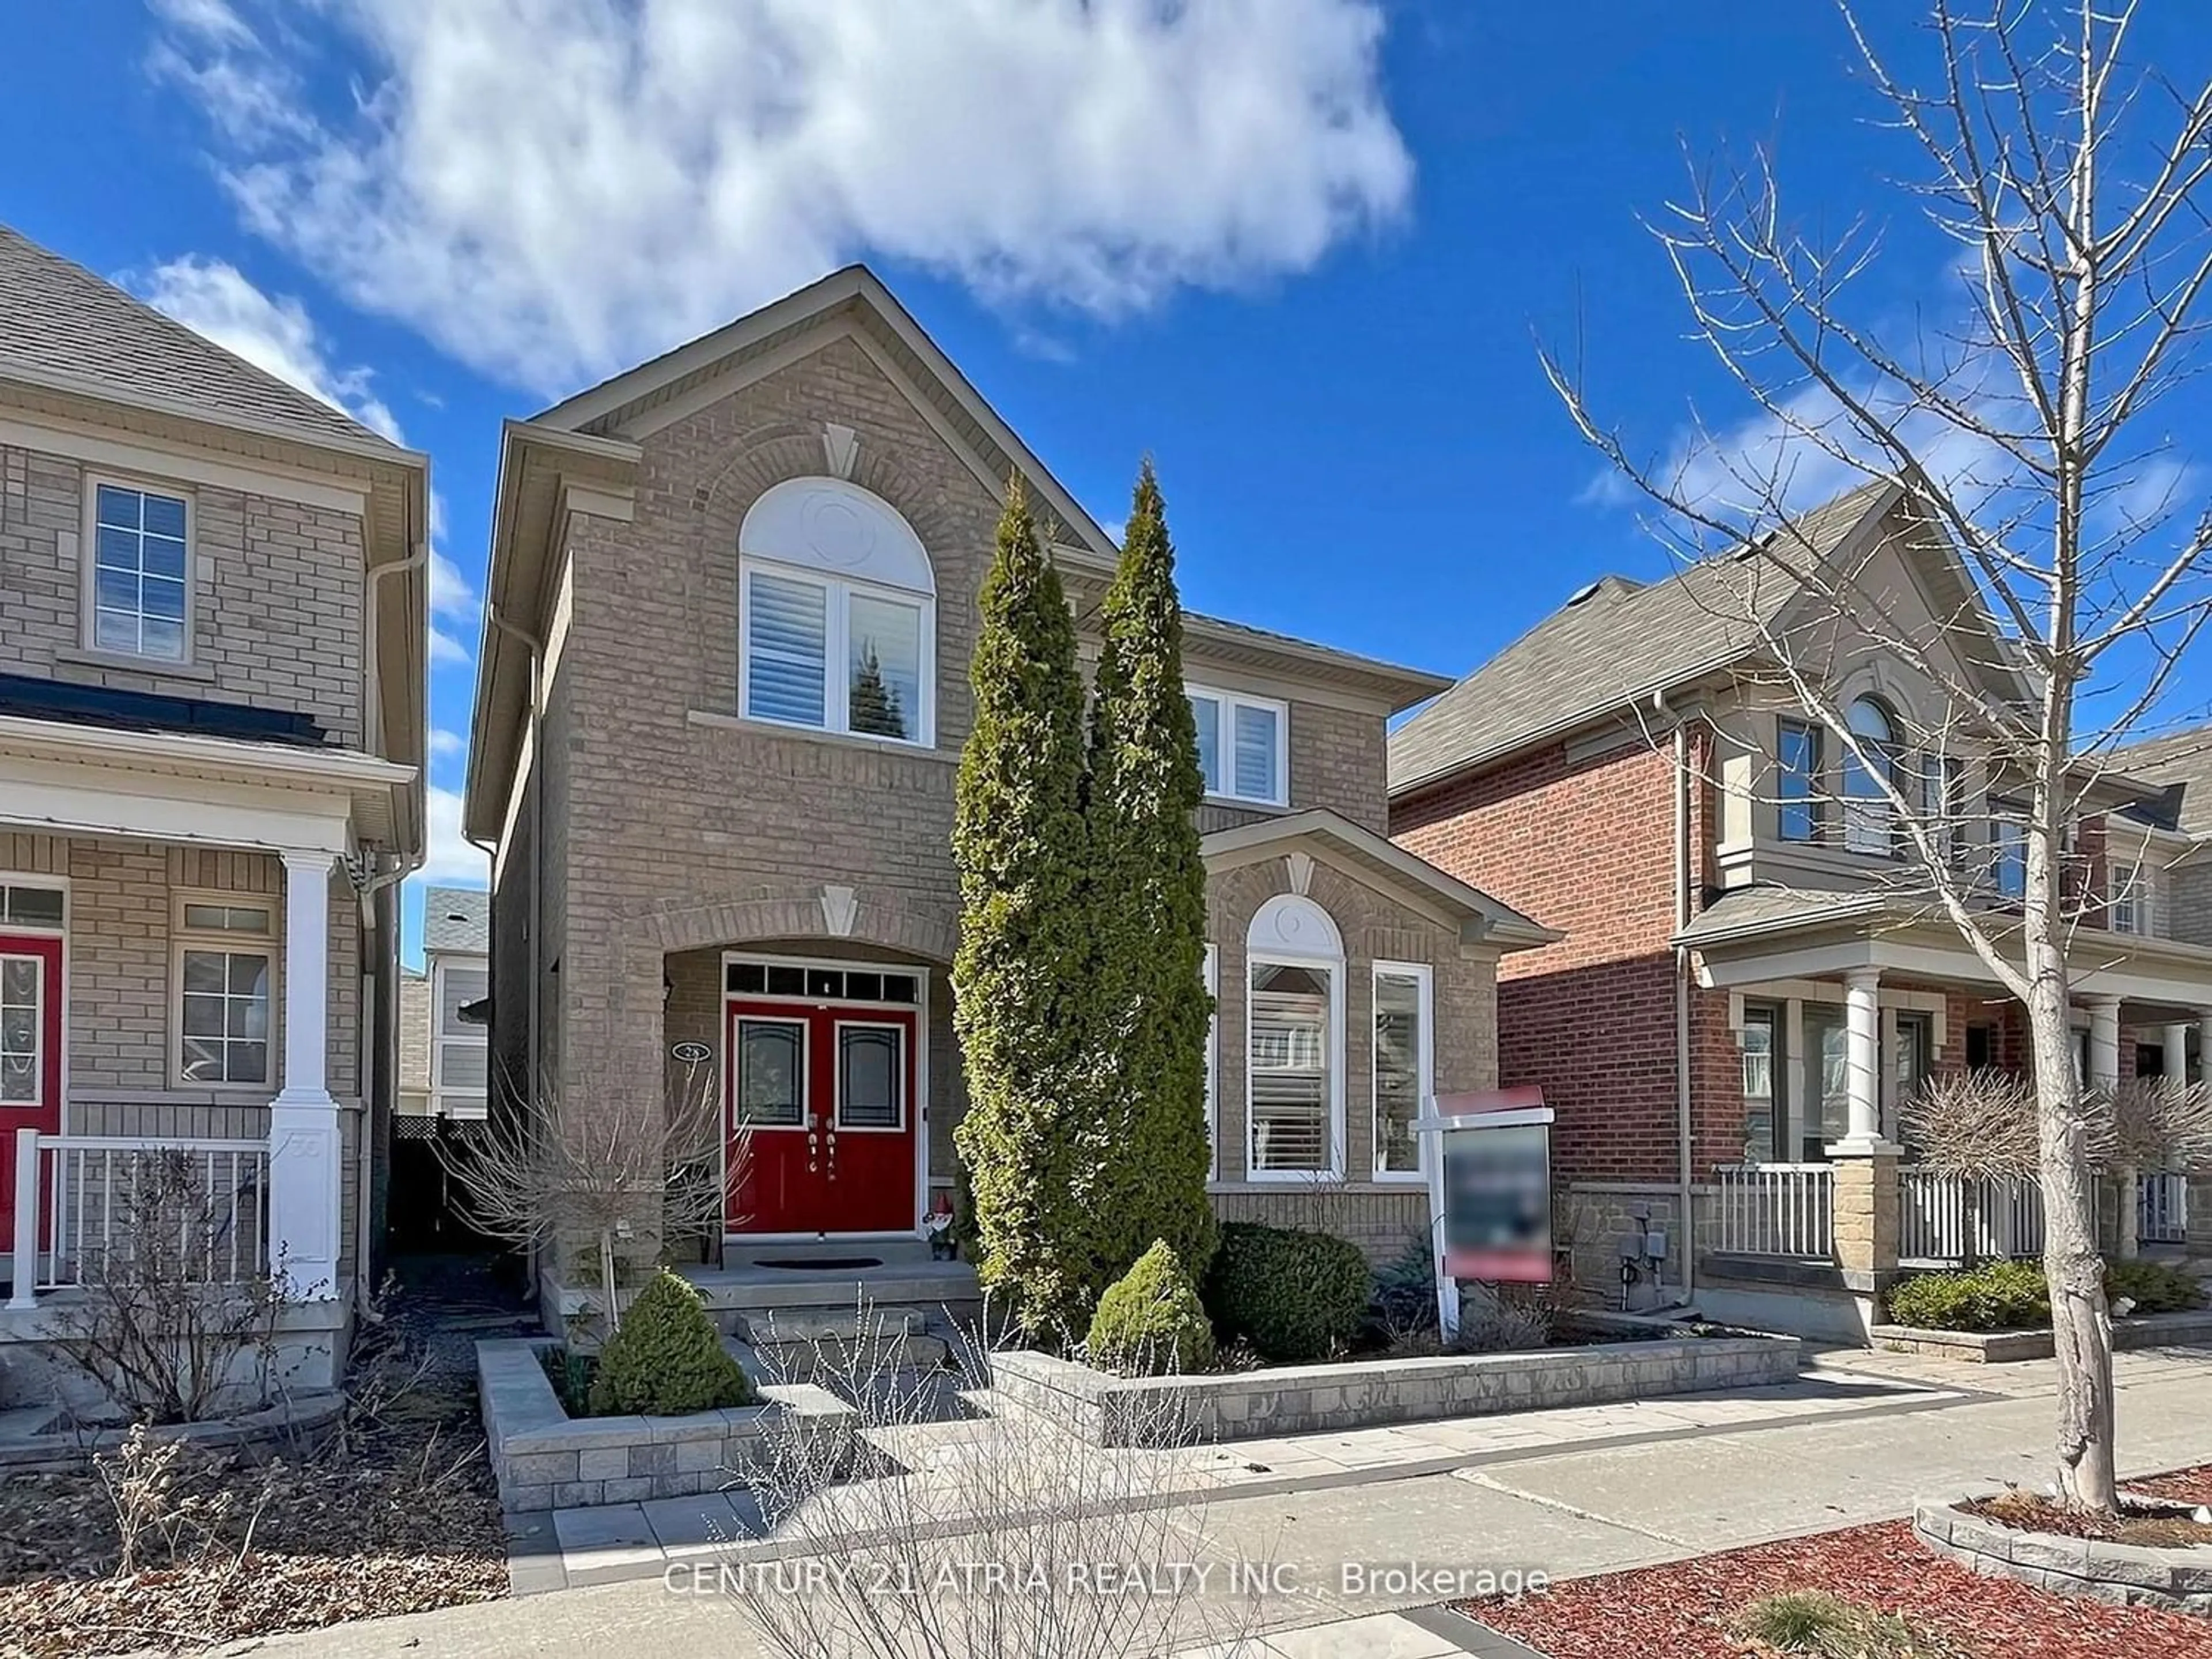 Home with brick exterior material for 28 Cardrew St, Markham Ontario L6B 1G2